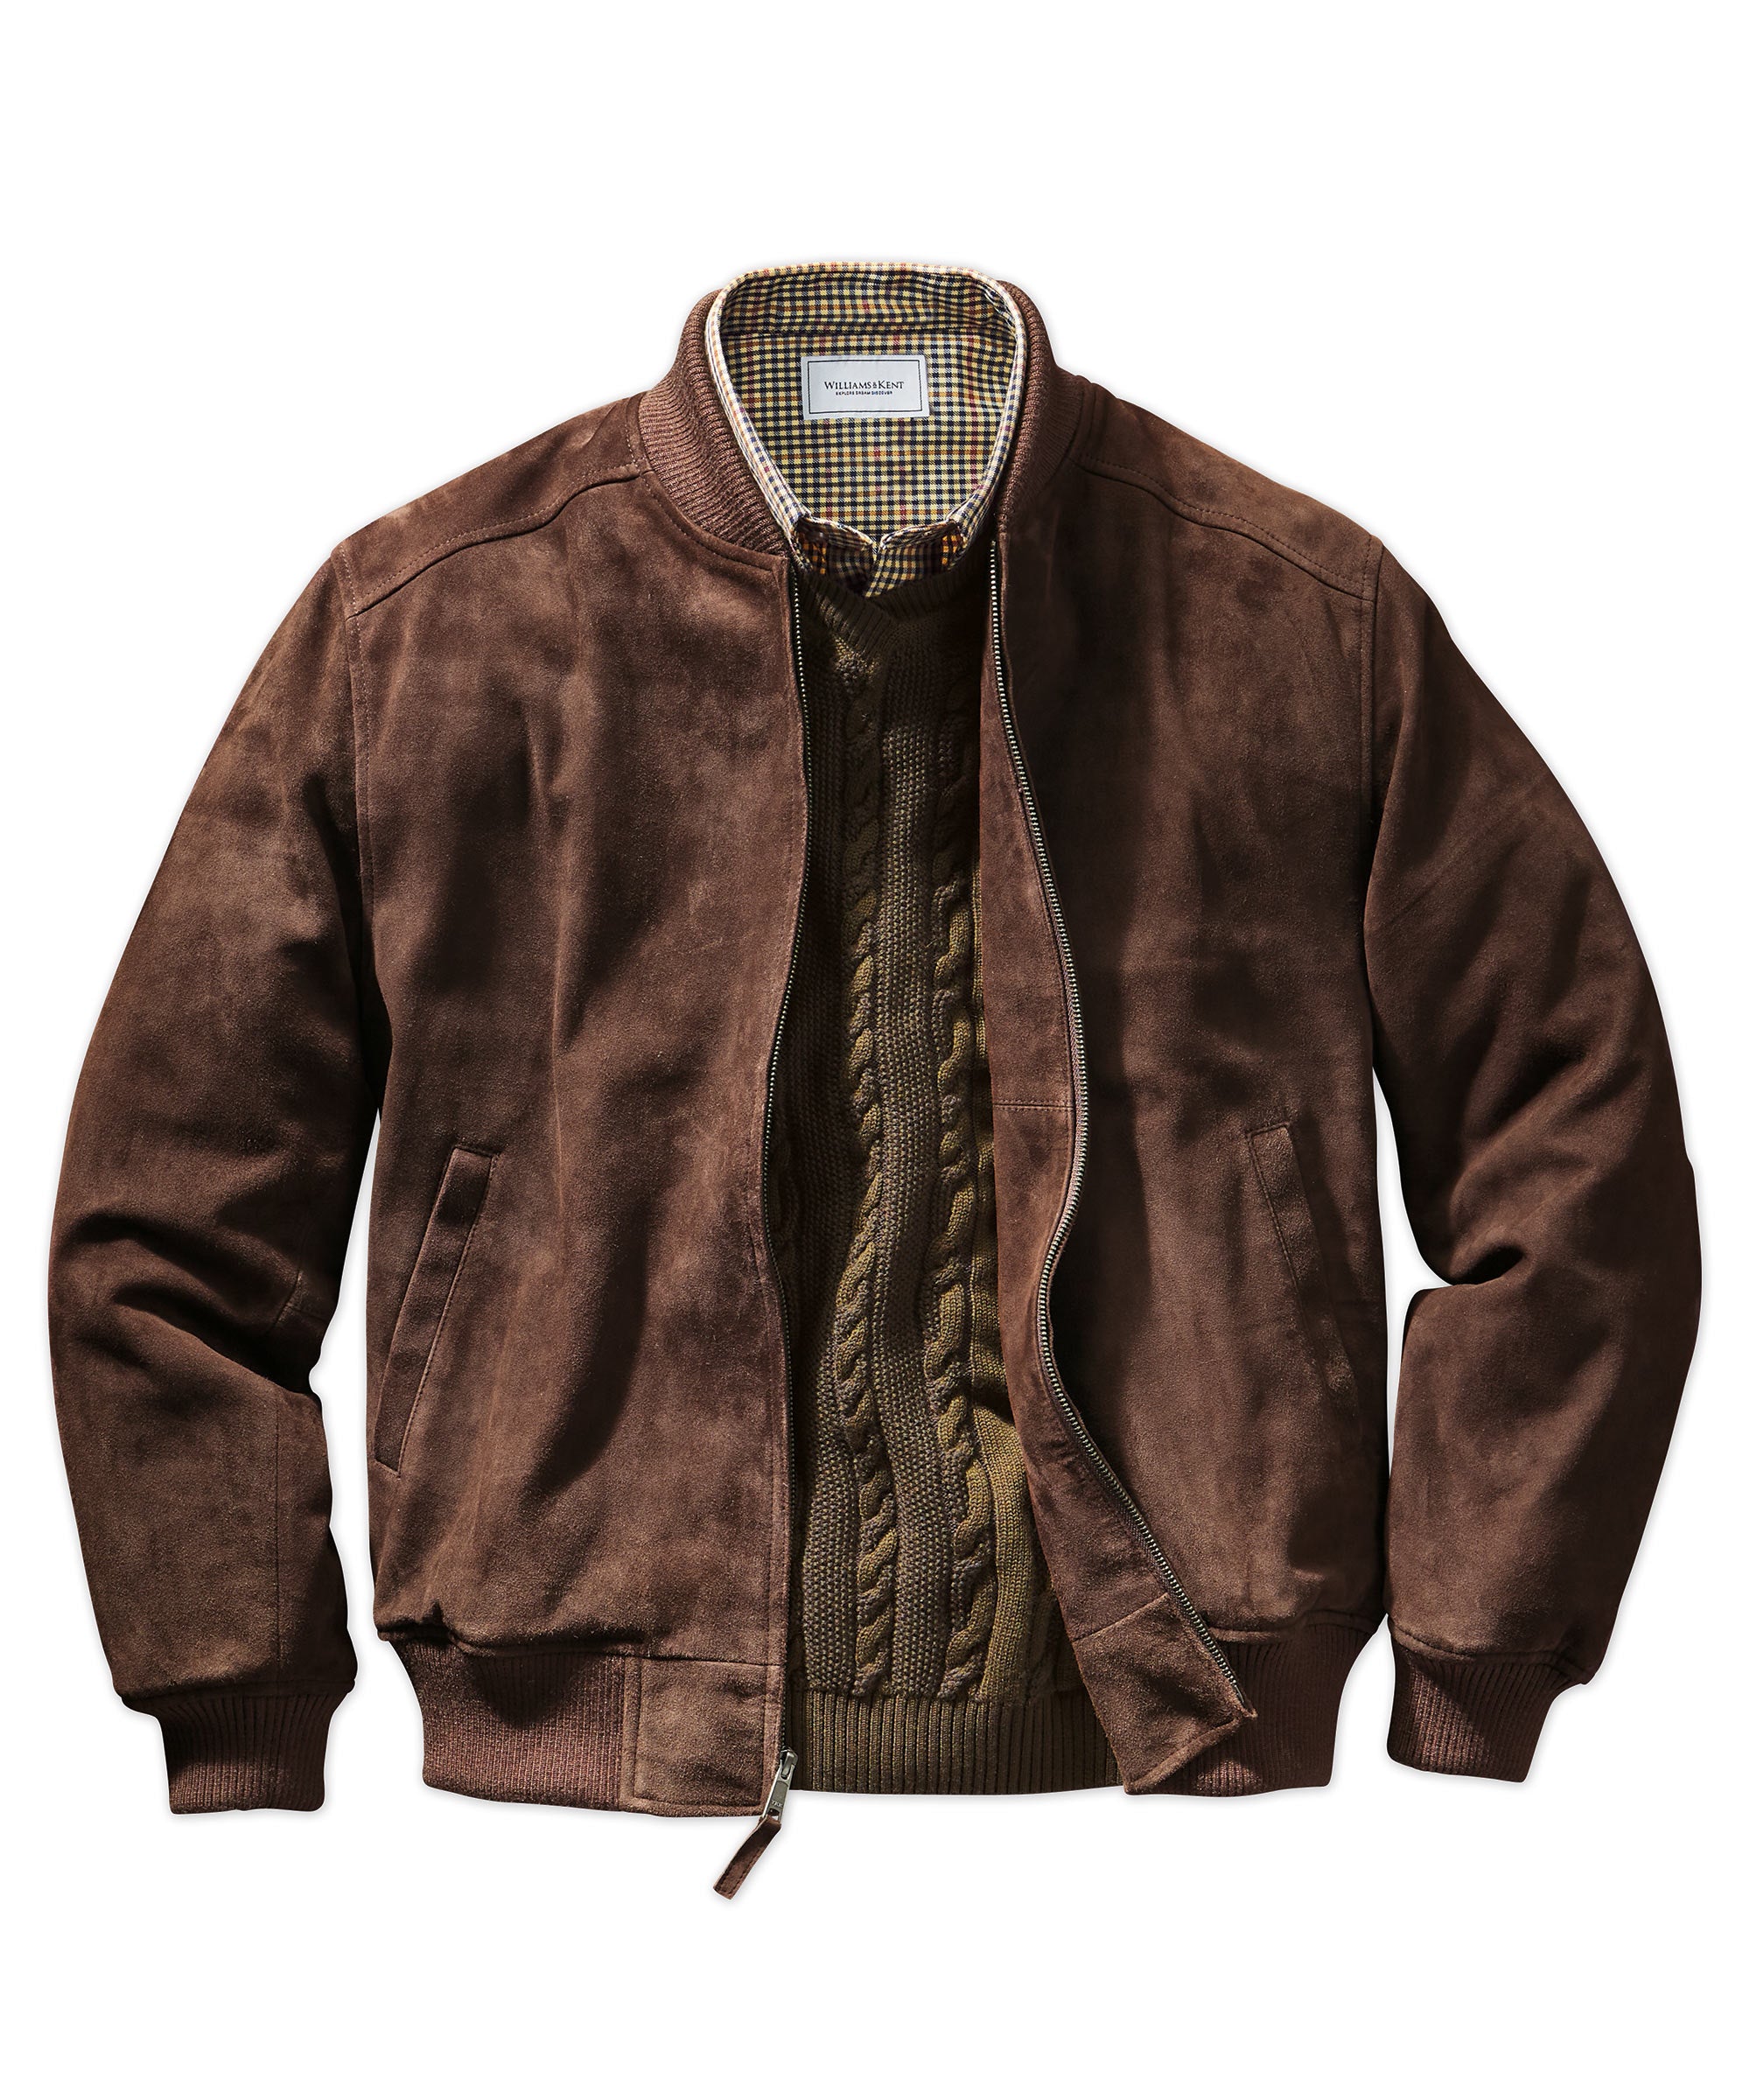 Men's Leather Jackets GUESS, 50% OFF